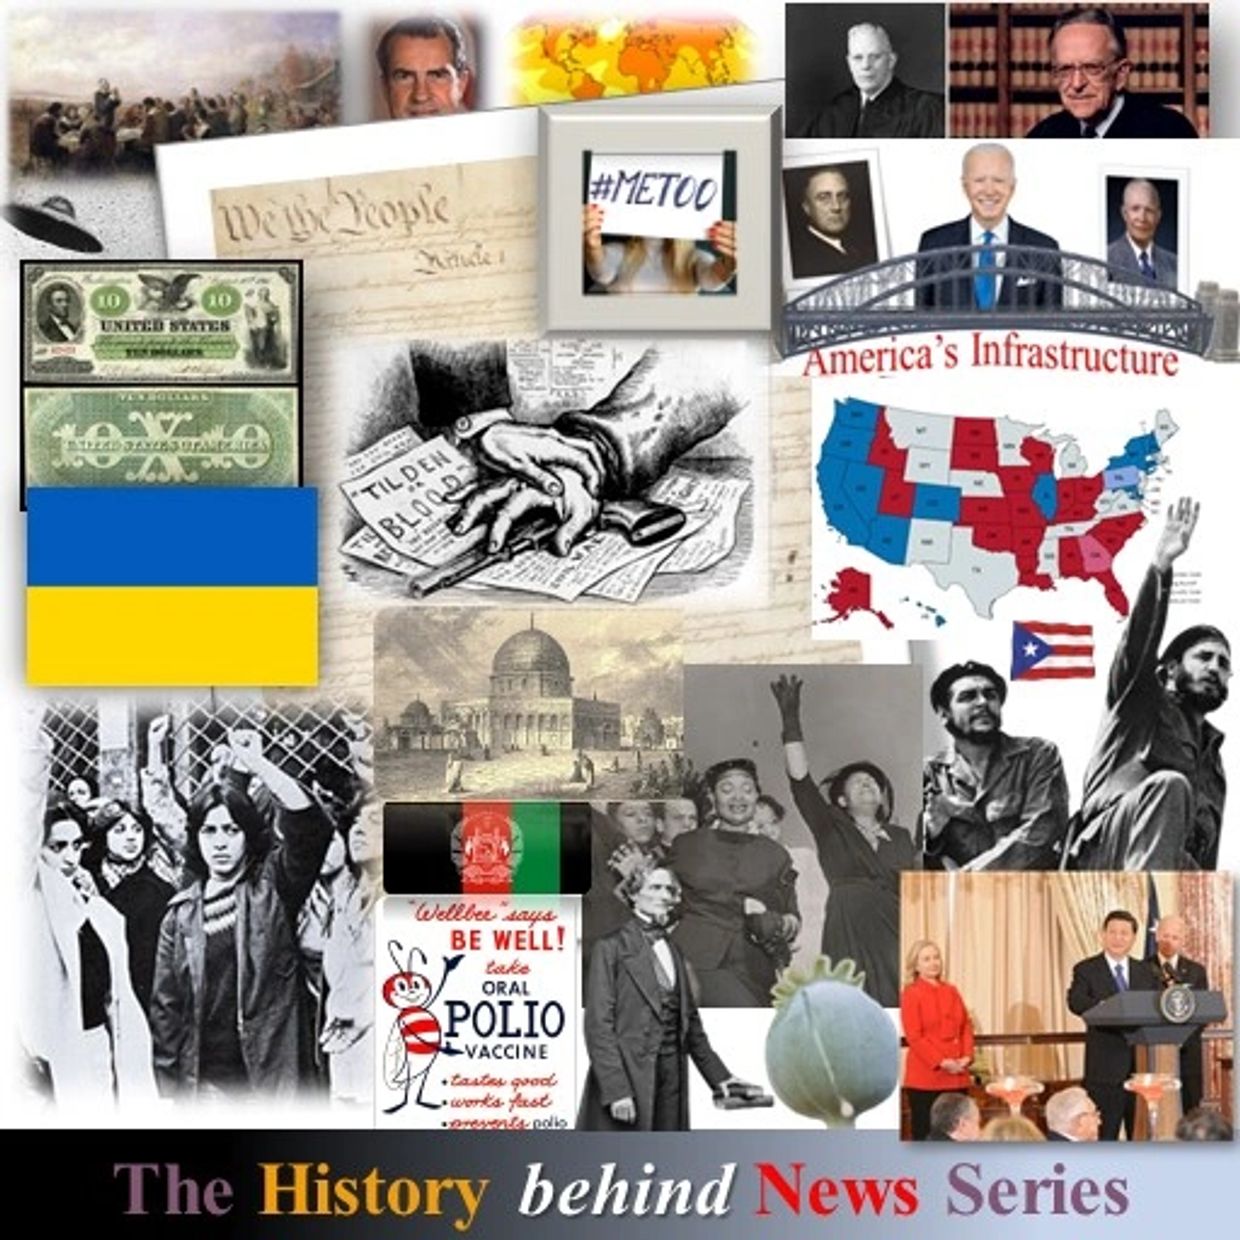 Visit the history behind news conversation series with scholars on wide-ranging history. 